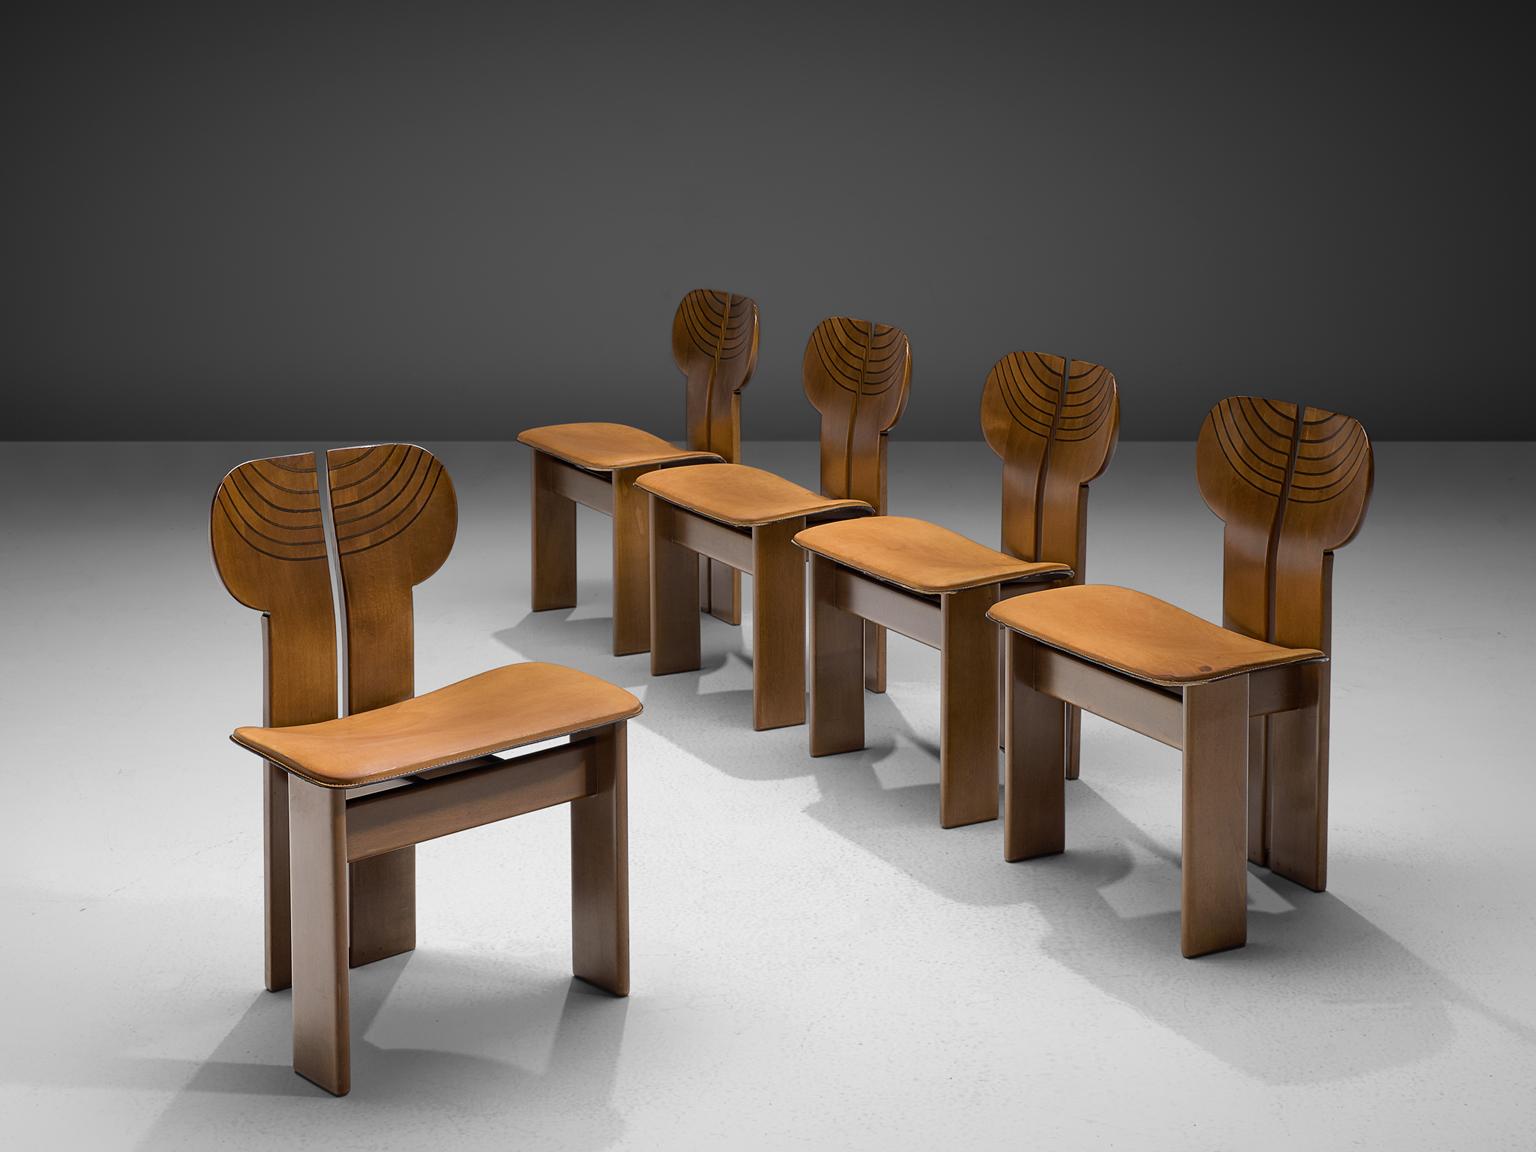 Afra & Tobia Scarpa, five dining chairs, cognac leather, walnut, ebony and brass, Maxalto, Italy, 1975.

This set of chairs explicitly sculptural grand chairs are by Afra & Tobia Scarpa and are titled 'Africa' and are part of the Artona collection